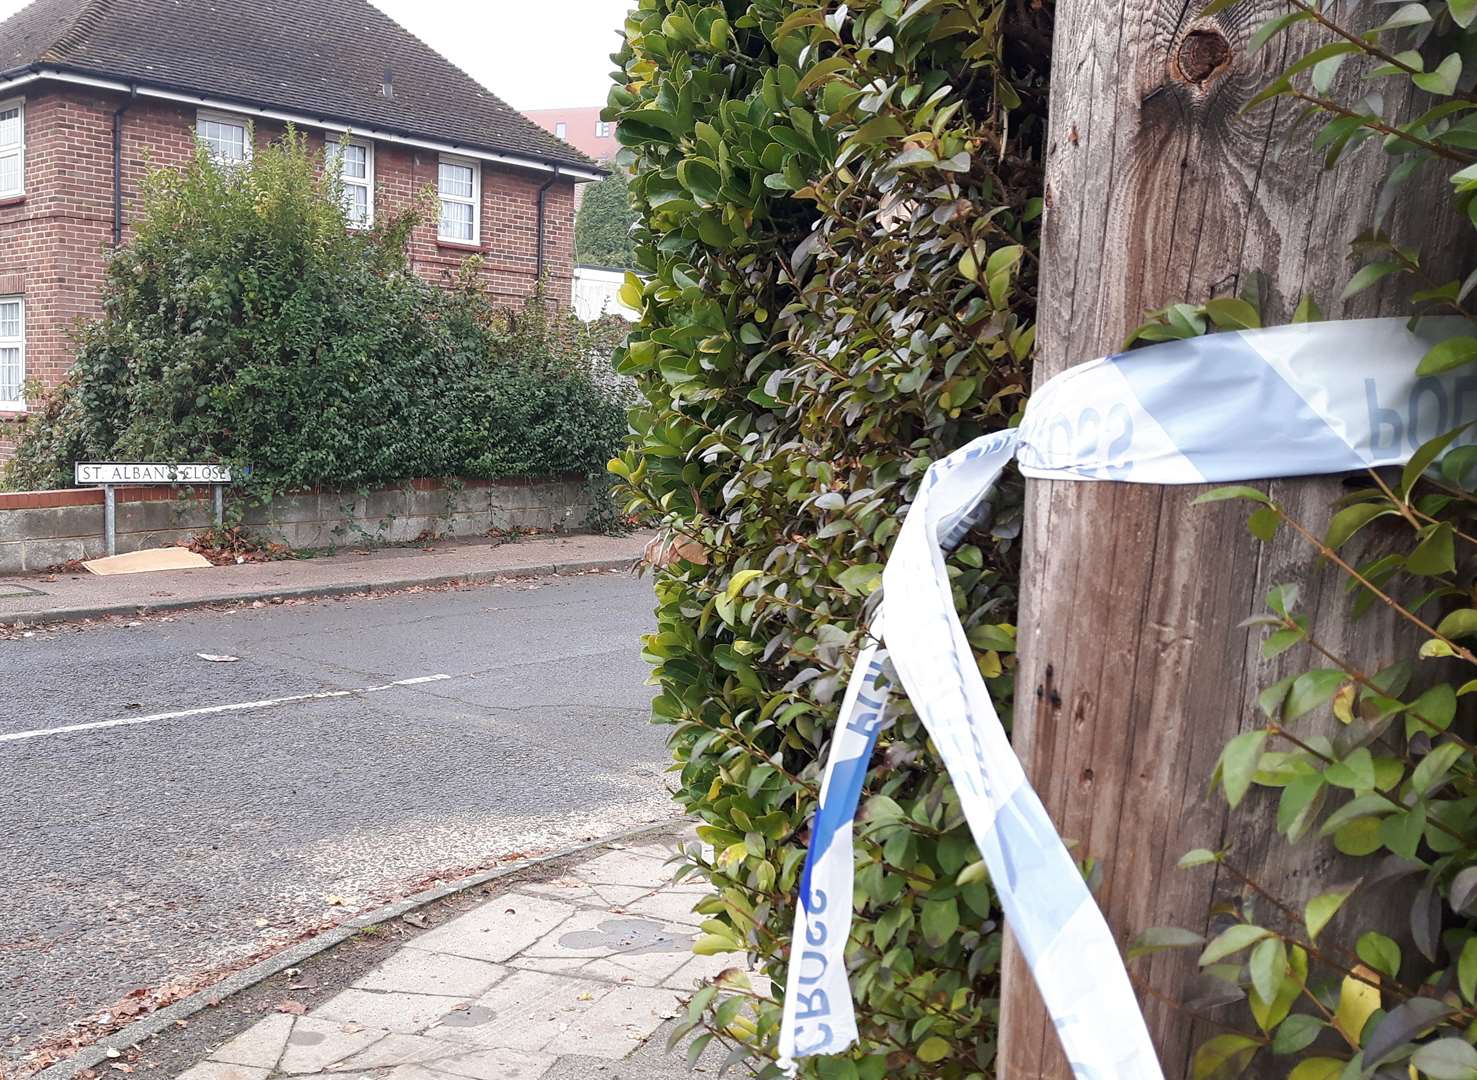 Neighbours 'not surprised' by stab attack